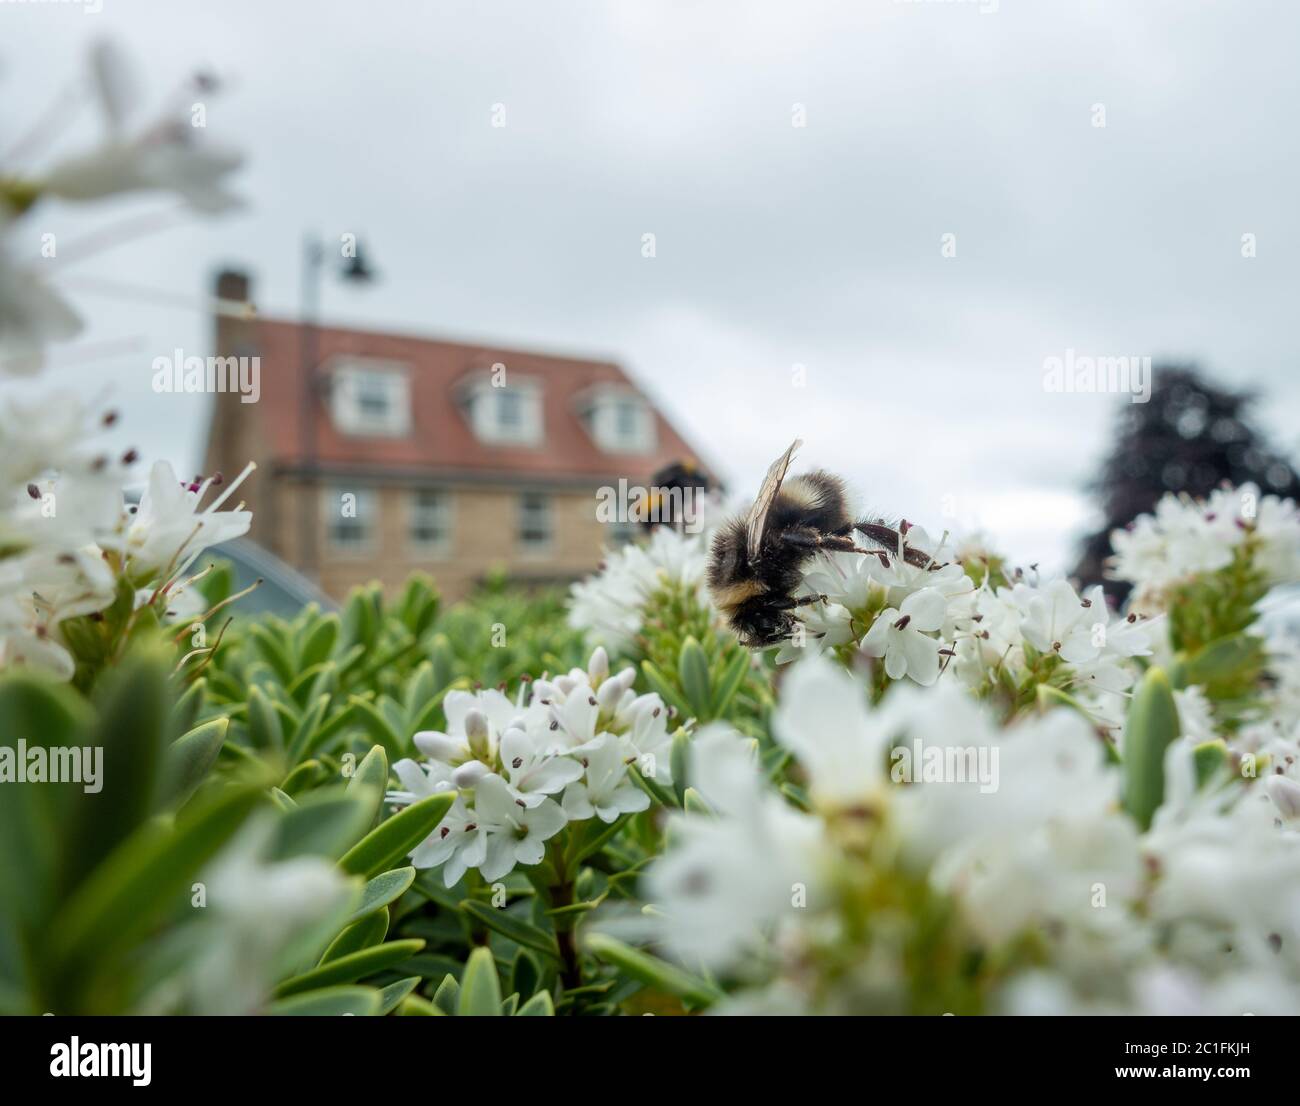 UK urban wildlife: bumblebees gather nectar and pollinate a hebe shrub in an front garden. West Yorkshire, UK Stock Photo